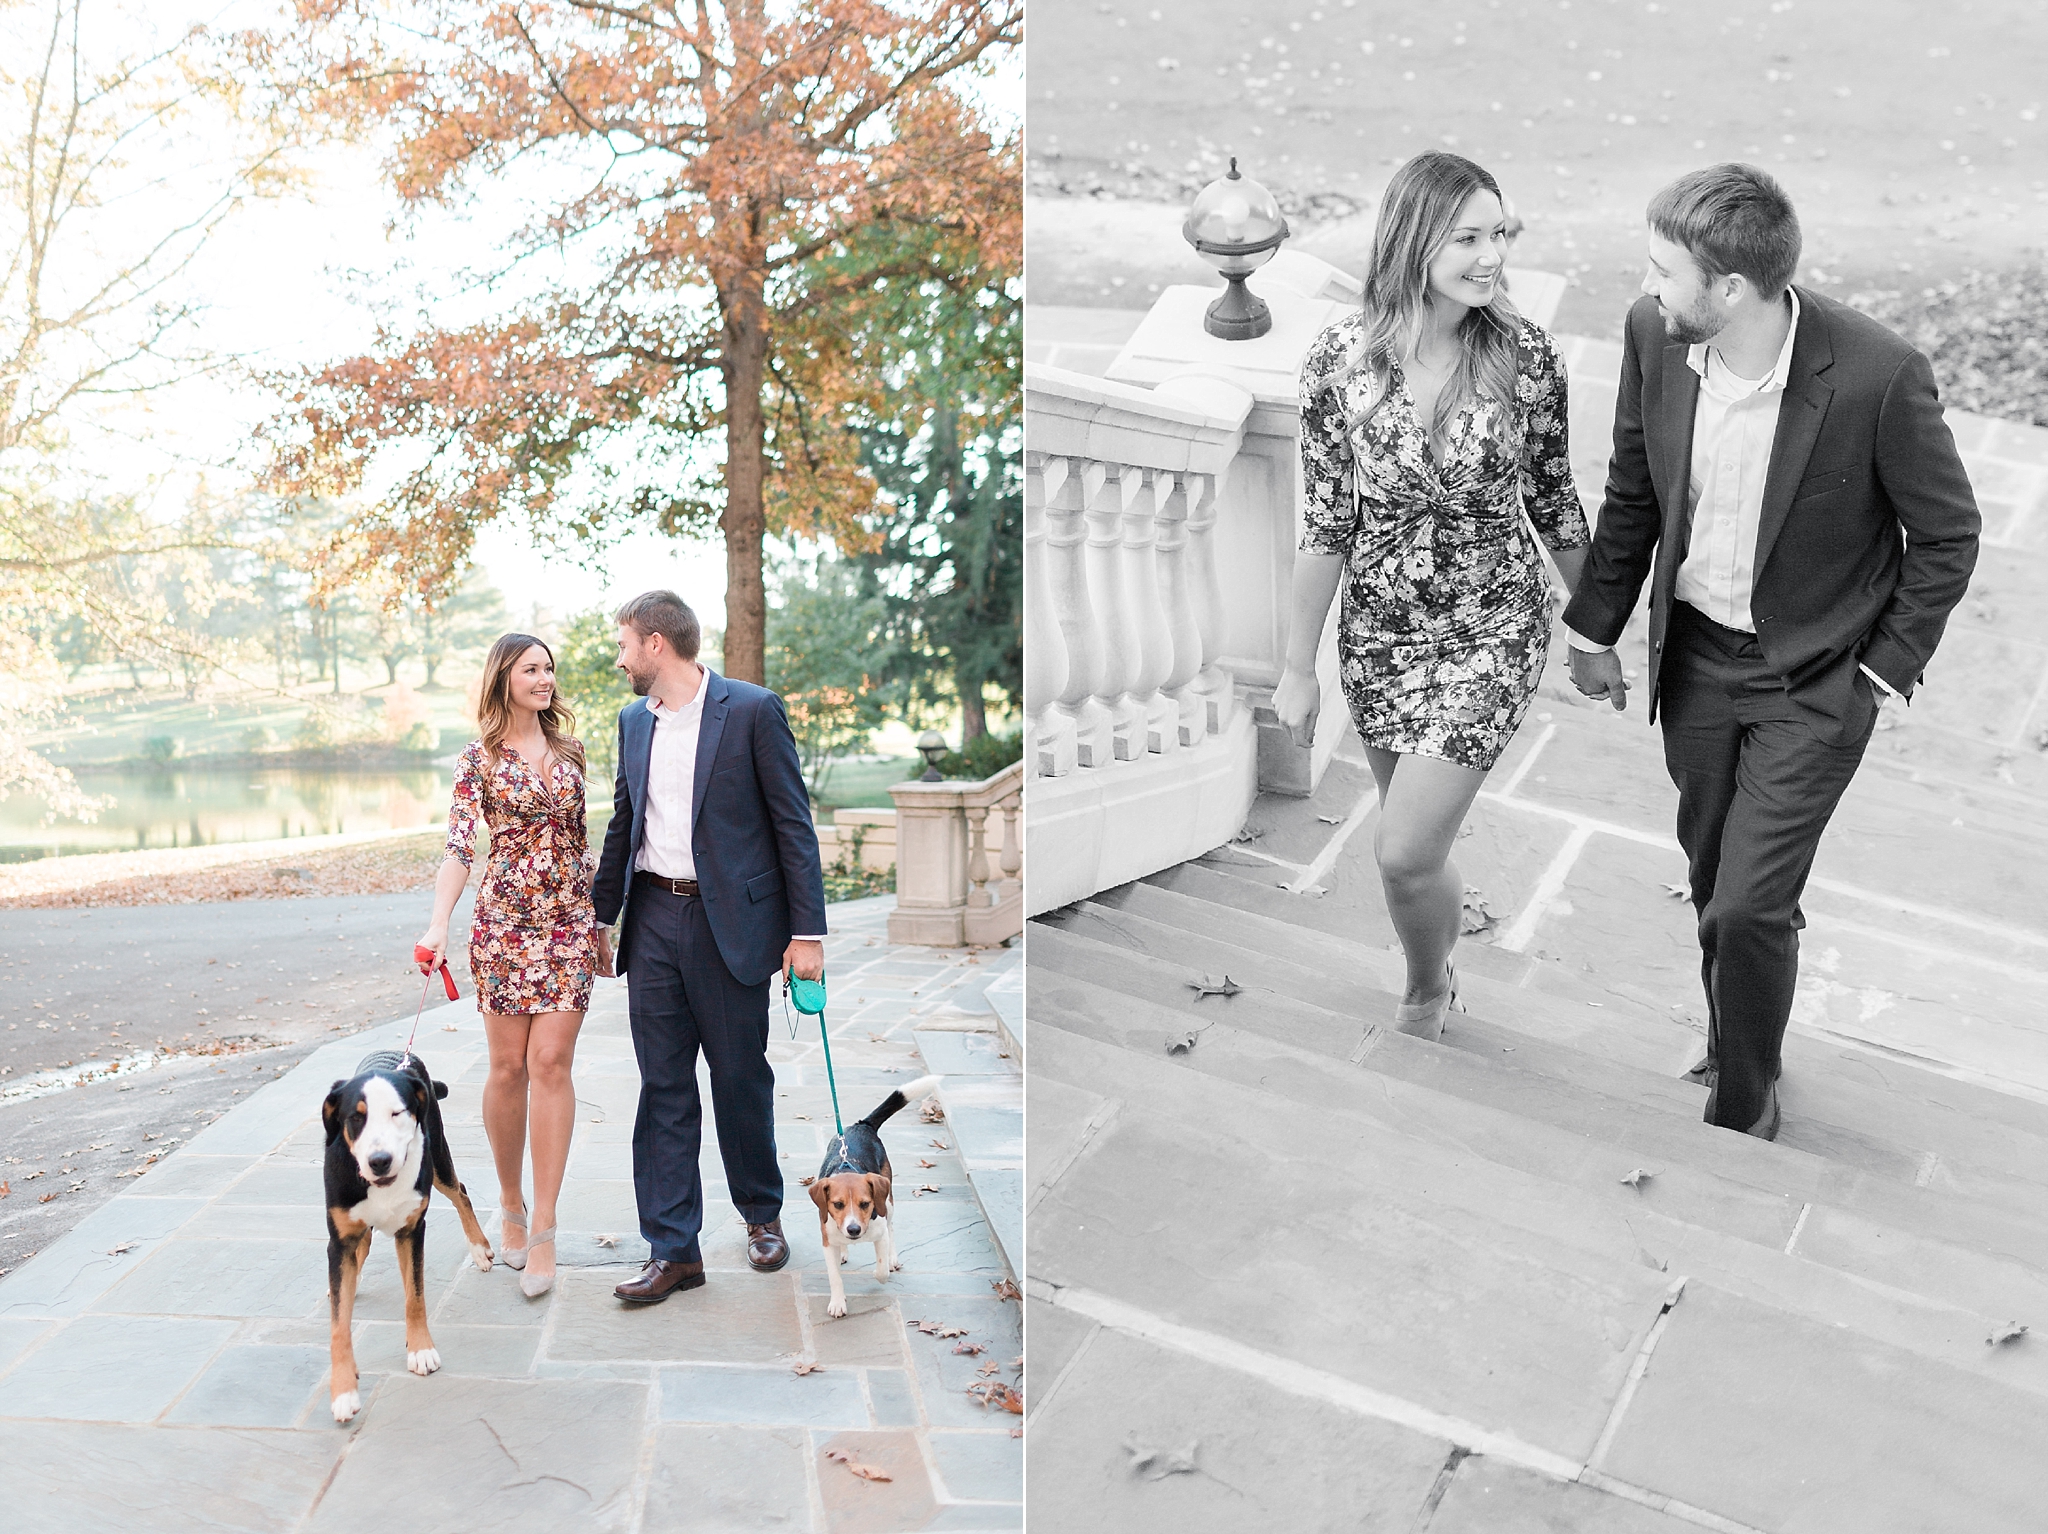 A stunning fall engagement session at Airlie Center in Warrenton, VA as photographed by Washington, DC wedding photographer, Alicia Lacey.